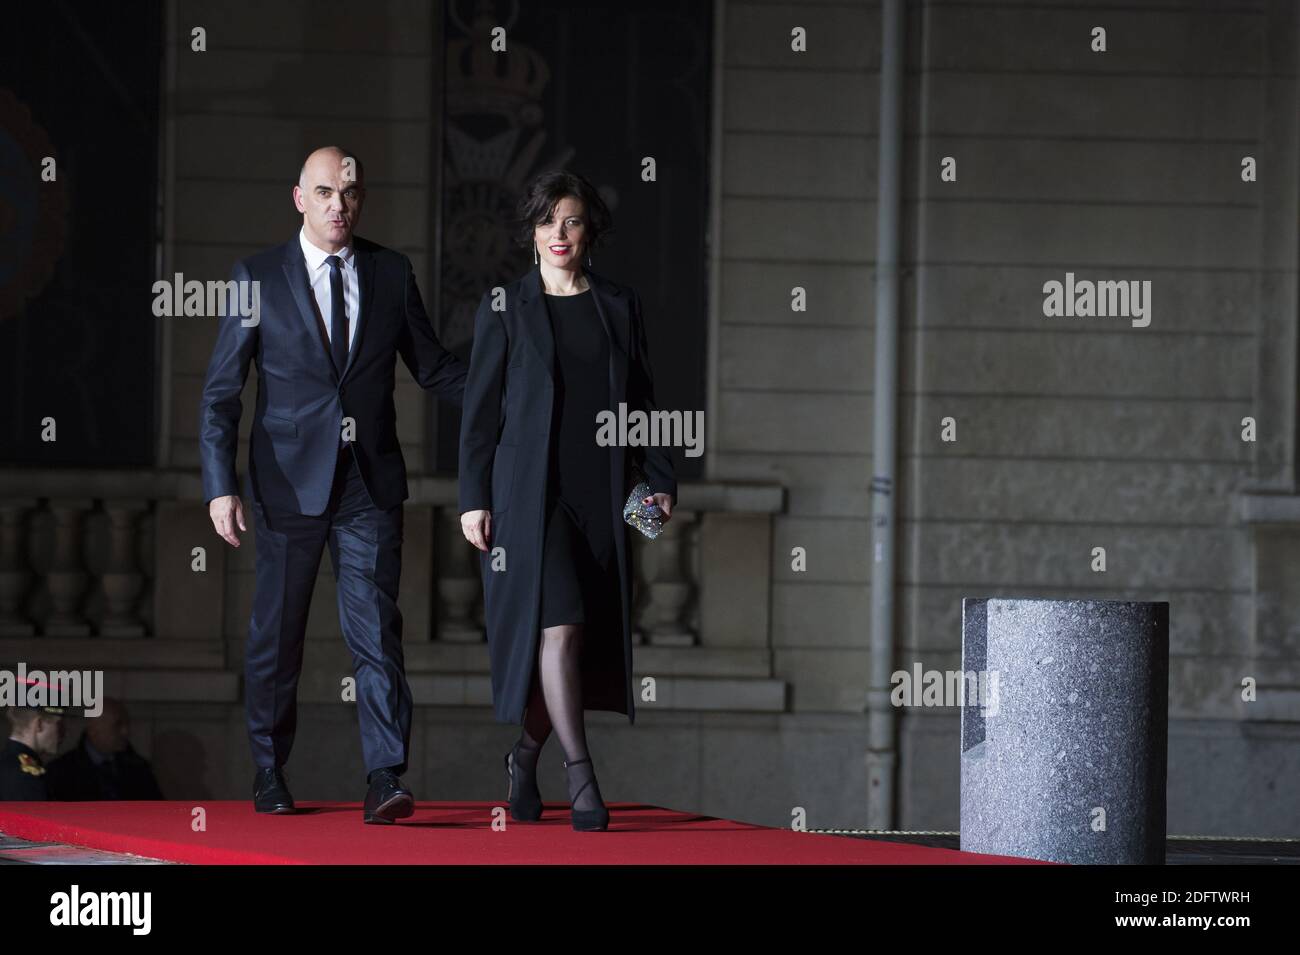 Swiss President Alain Berset and wife Muriel Zeender arriving for a State  Dinner at the Musee d'Orsay in Paris, France, for the centenary of the end  of World War I on November